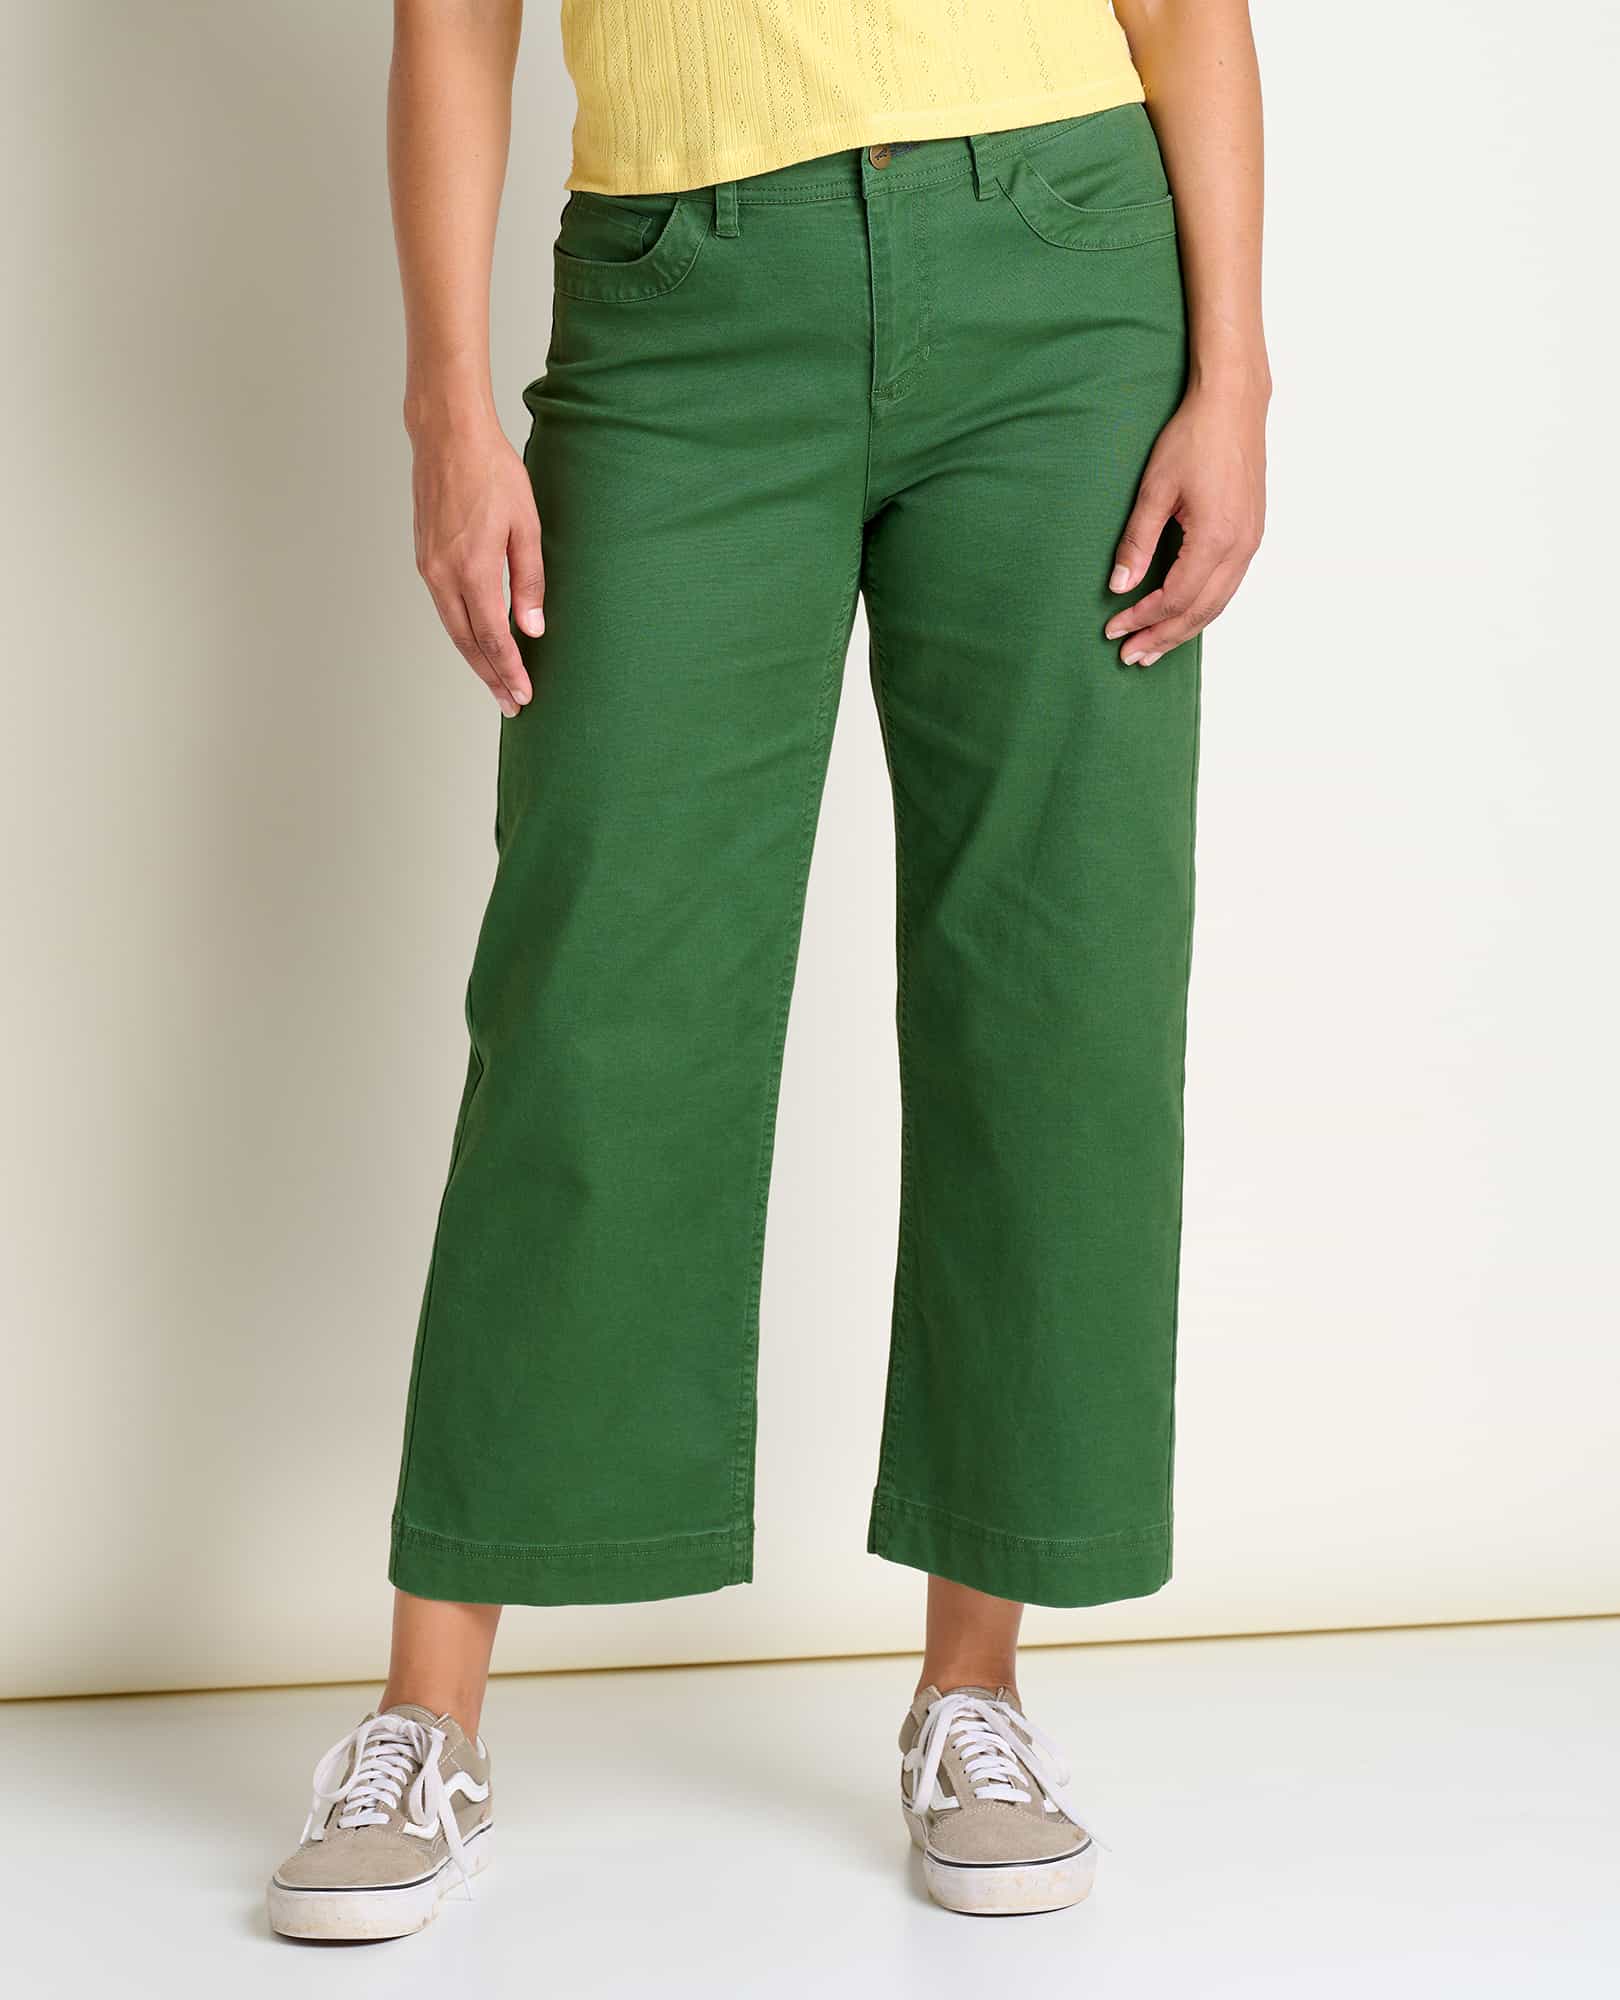 Go Green: How I'm Wearing J. Crew's Sustainable Cargo Pants - The